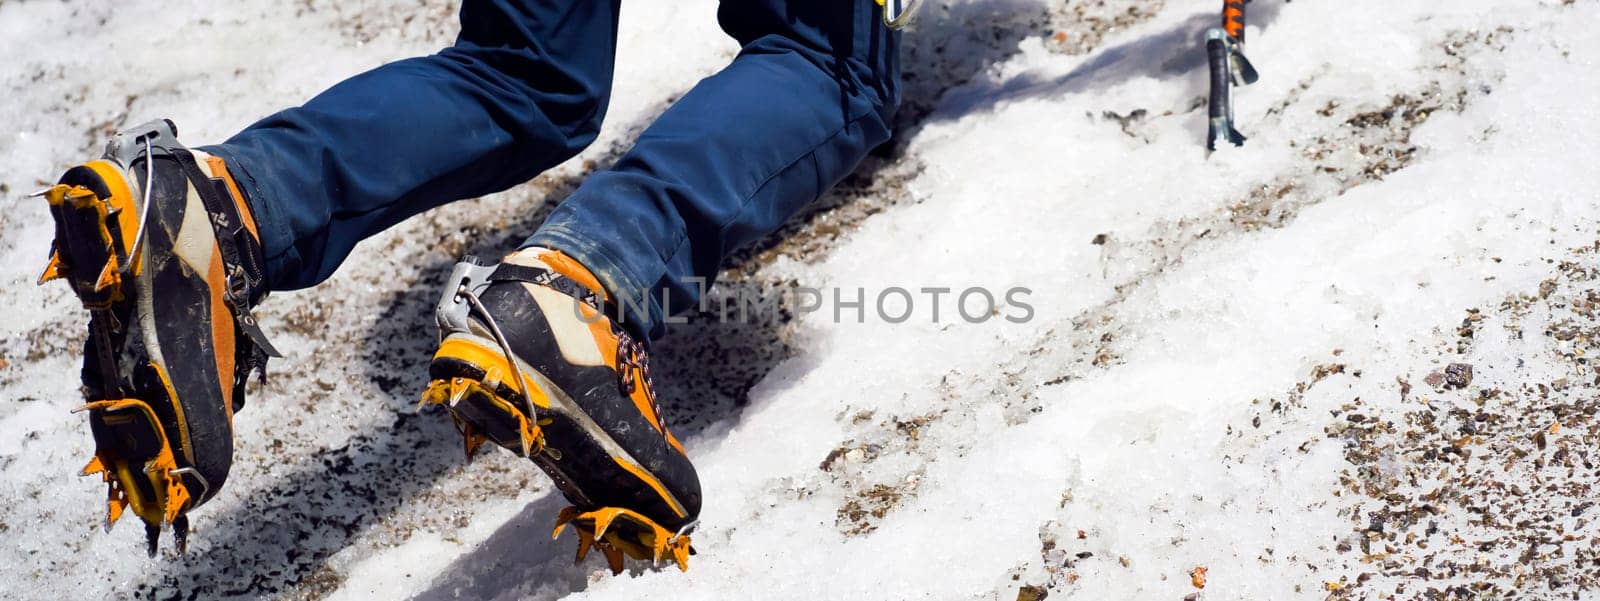 A man goes hiking, winter hiking in the highlands, and puts crampons on his climbing boots before climbing the glacier and snowy mountain.